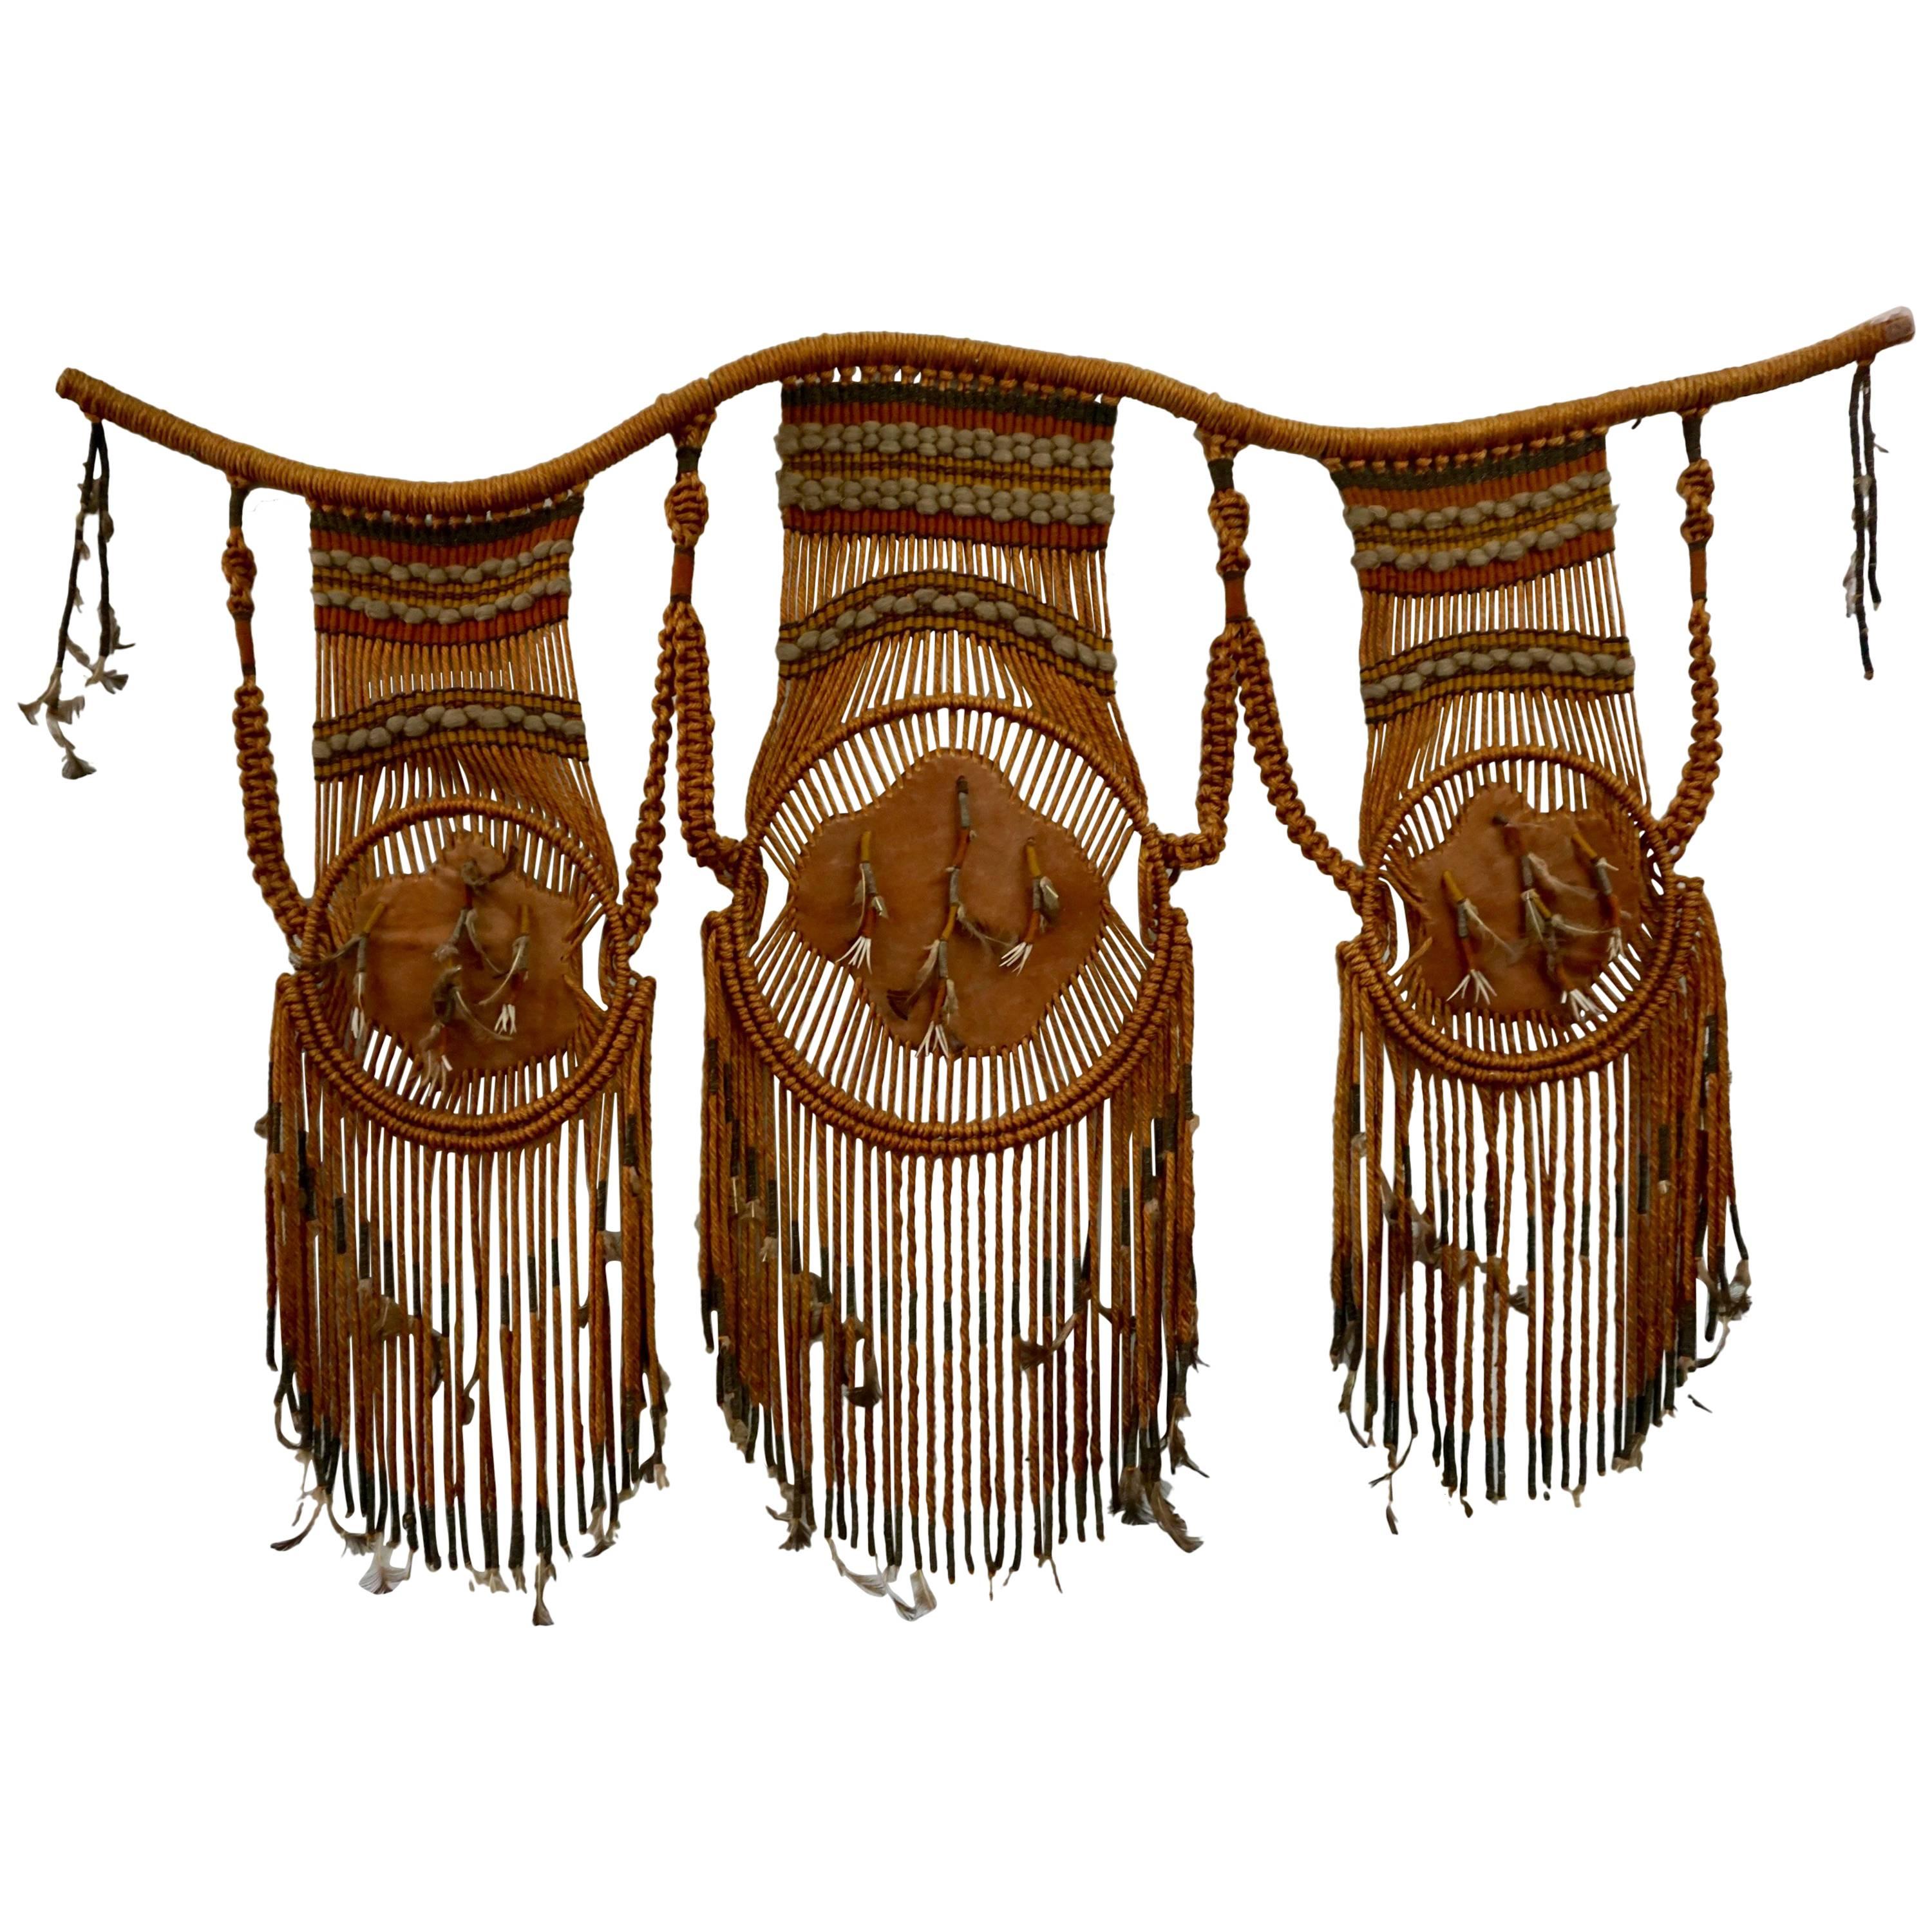 Tribal Art / 1960s Hippie Wall Hanging Combo For Sale at 1stDibs